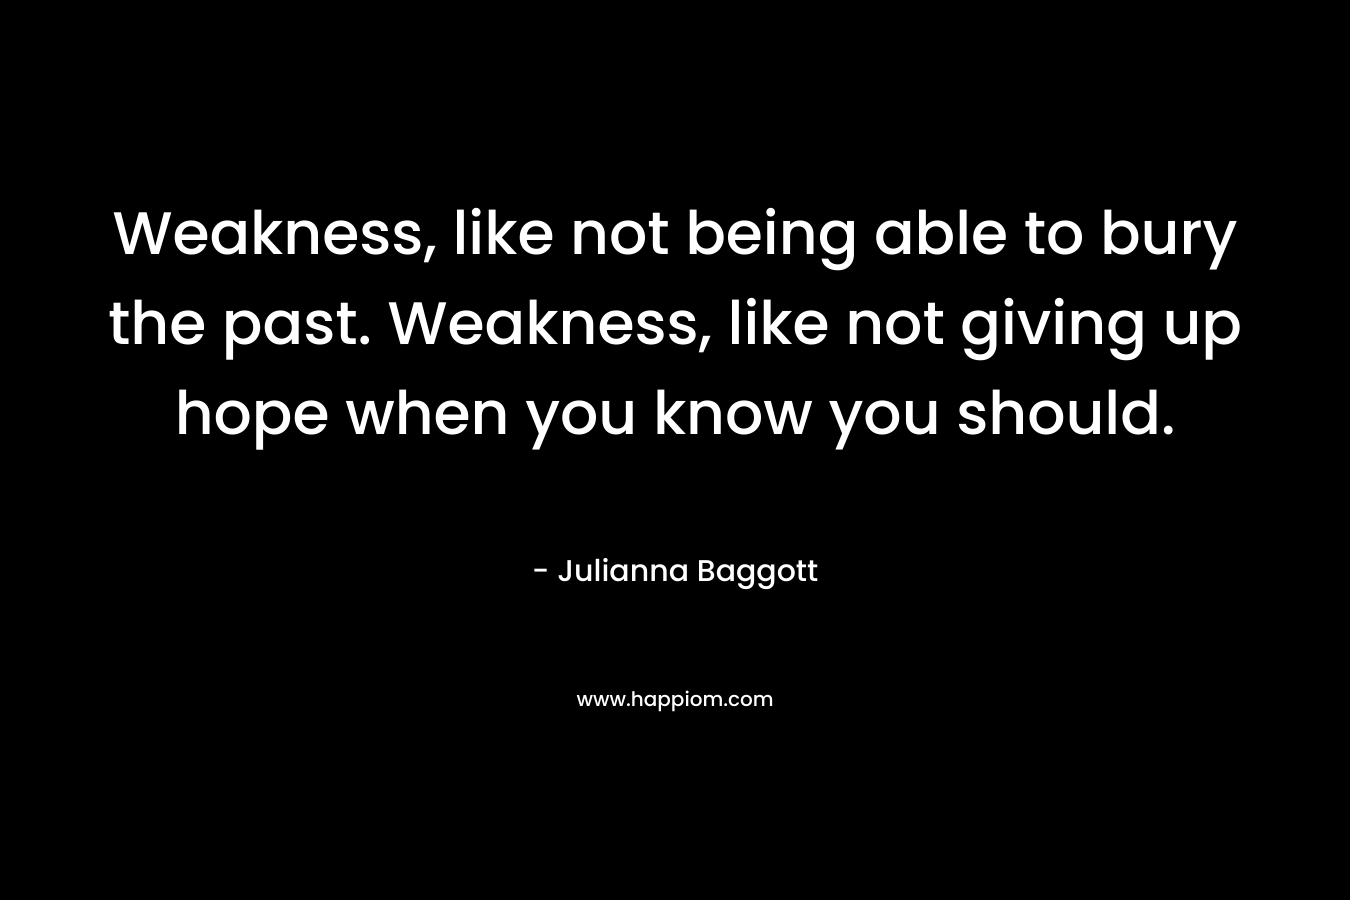 Weakness, like not being able to bury the past. Weakness, like not giving up hope when you know you should. – Julianna Baggott